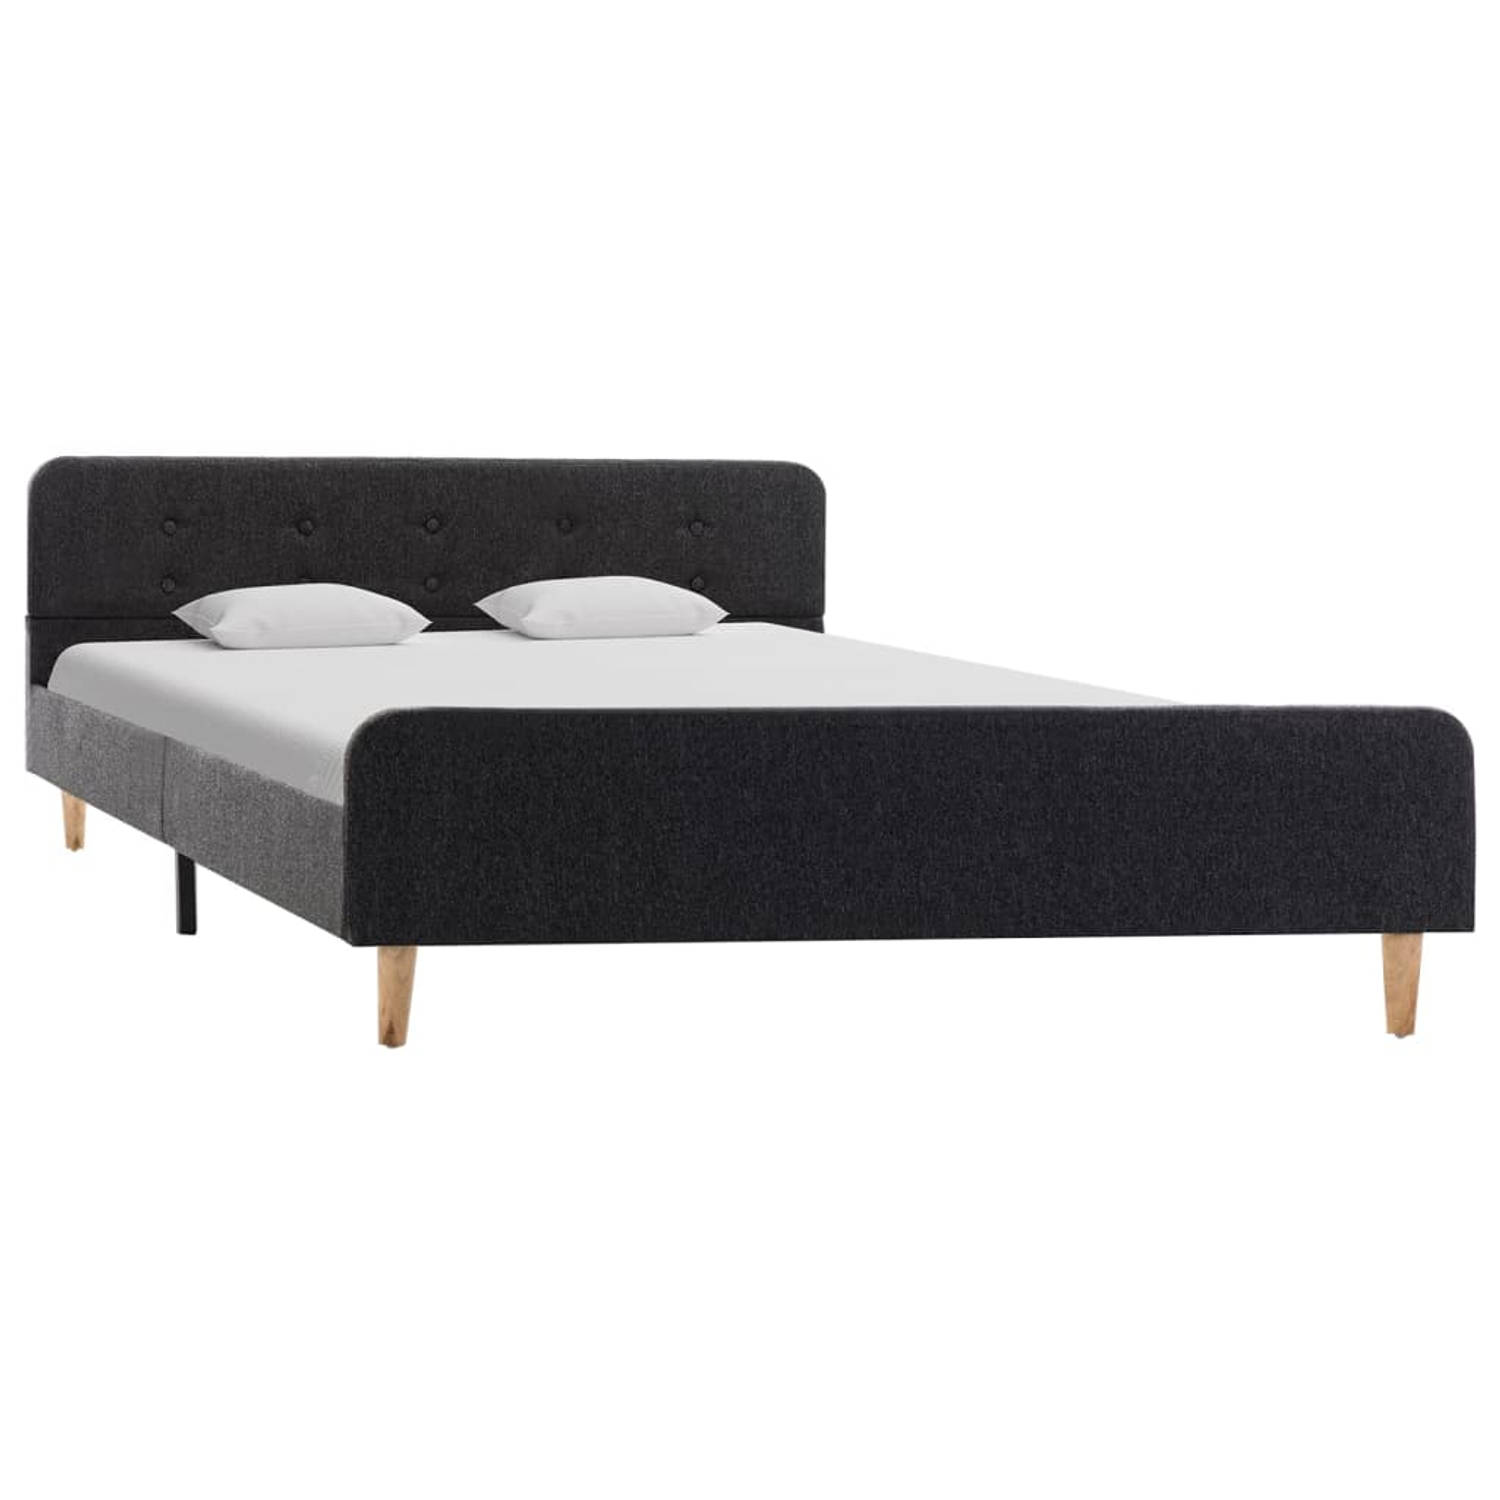 The Living Store Bedframe Classic - 160 x 200 cm - donkergrijs